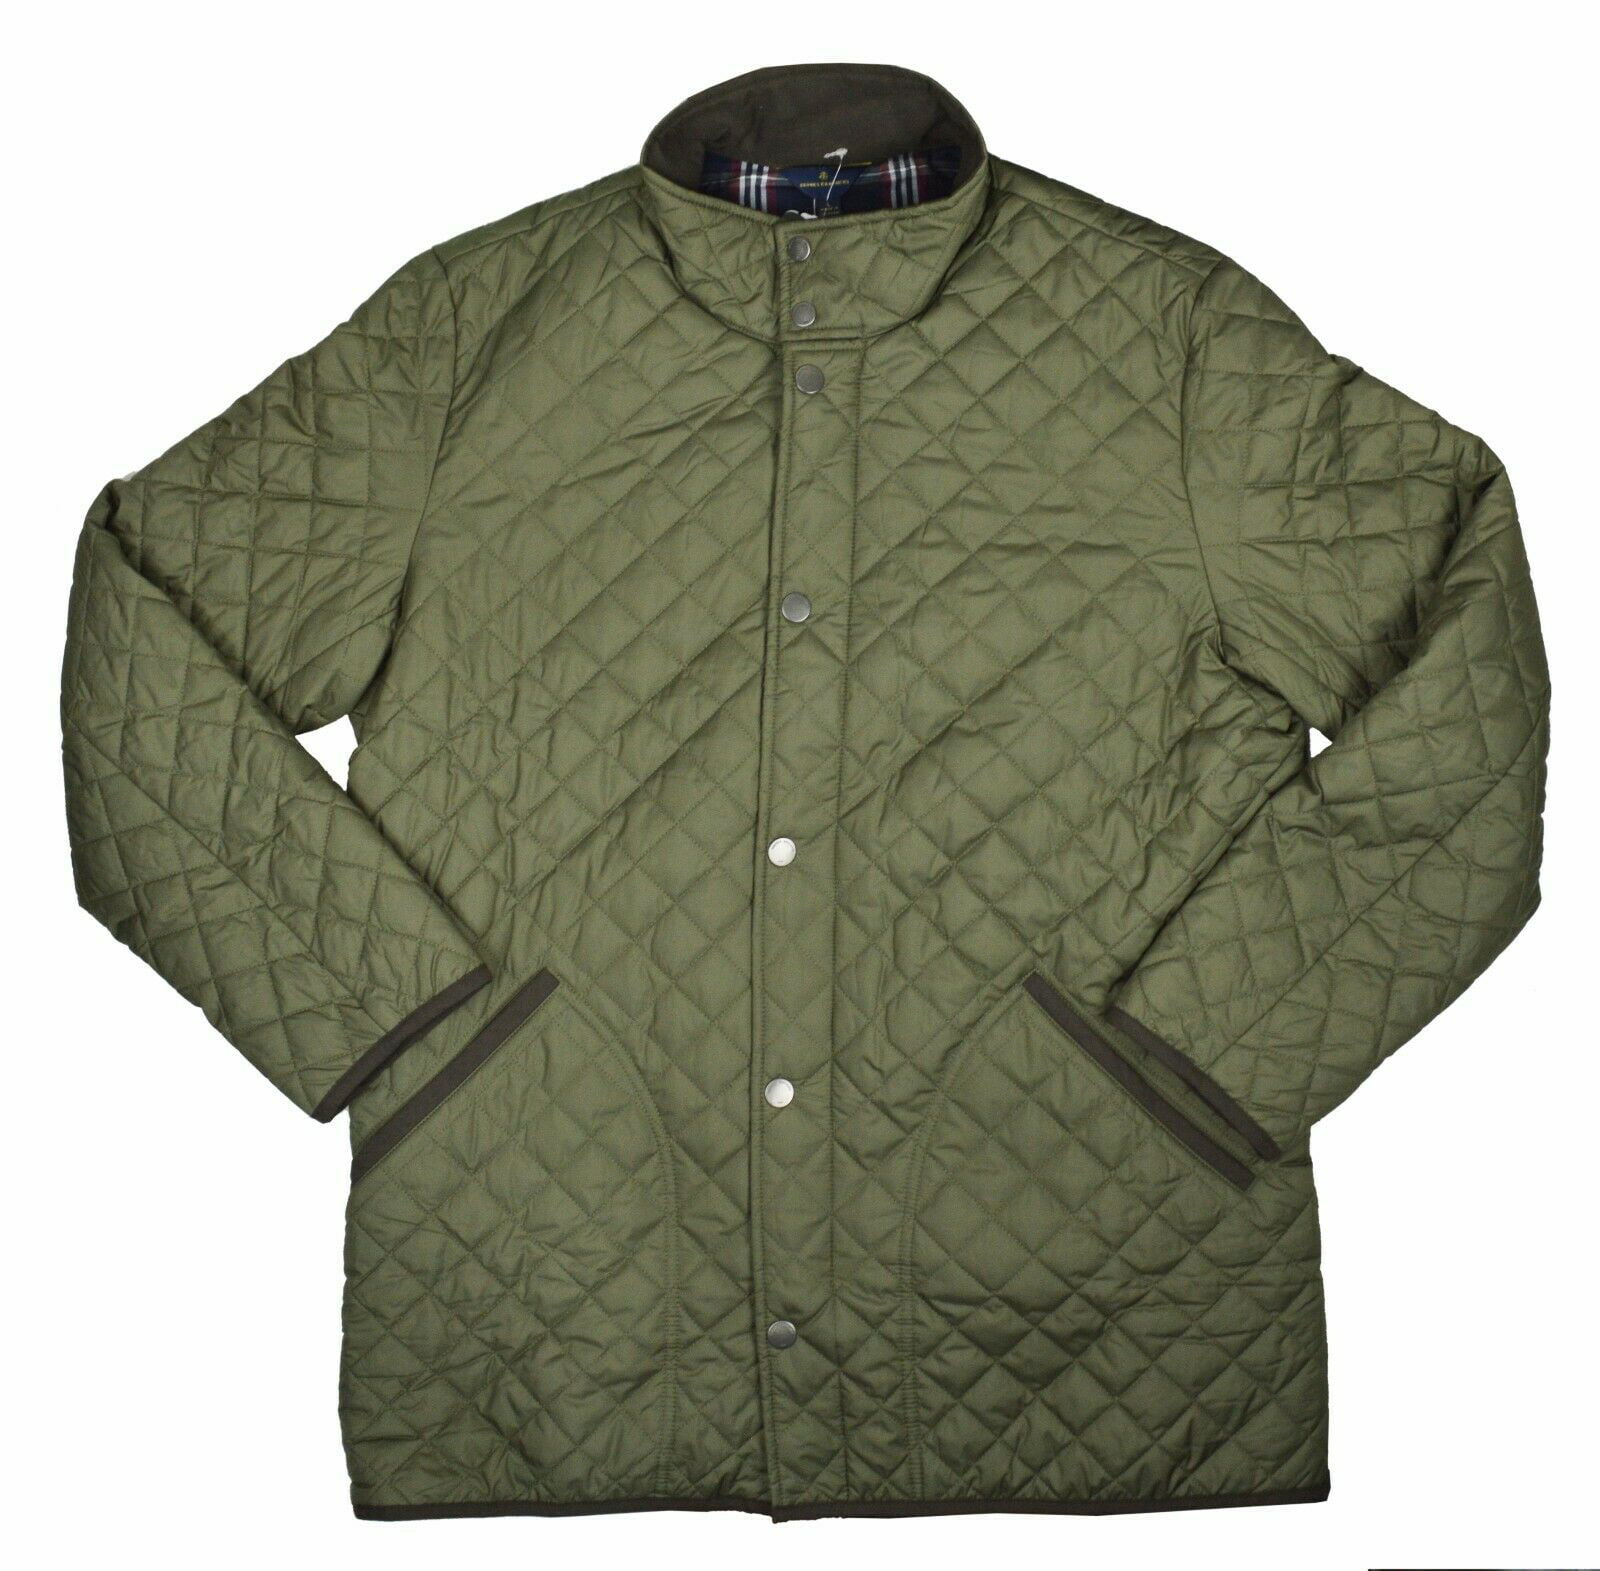 New Brooks Brothers Men's Diamond Quilted Jacket, Green, Size 2X-Large ...